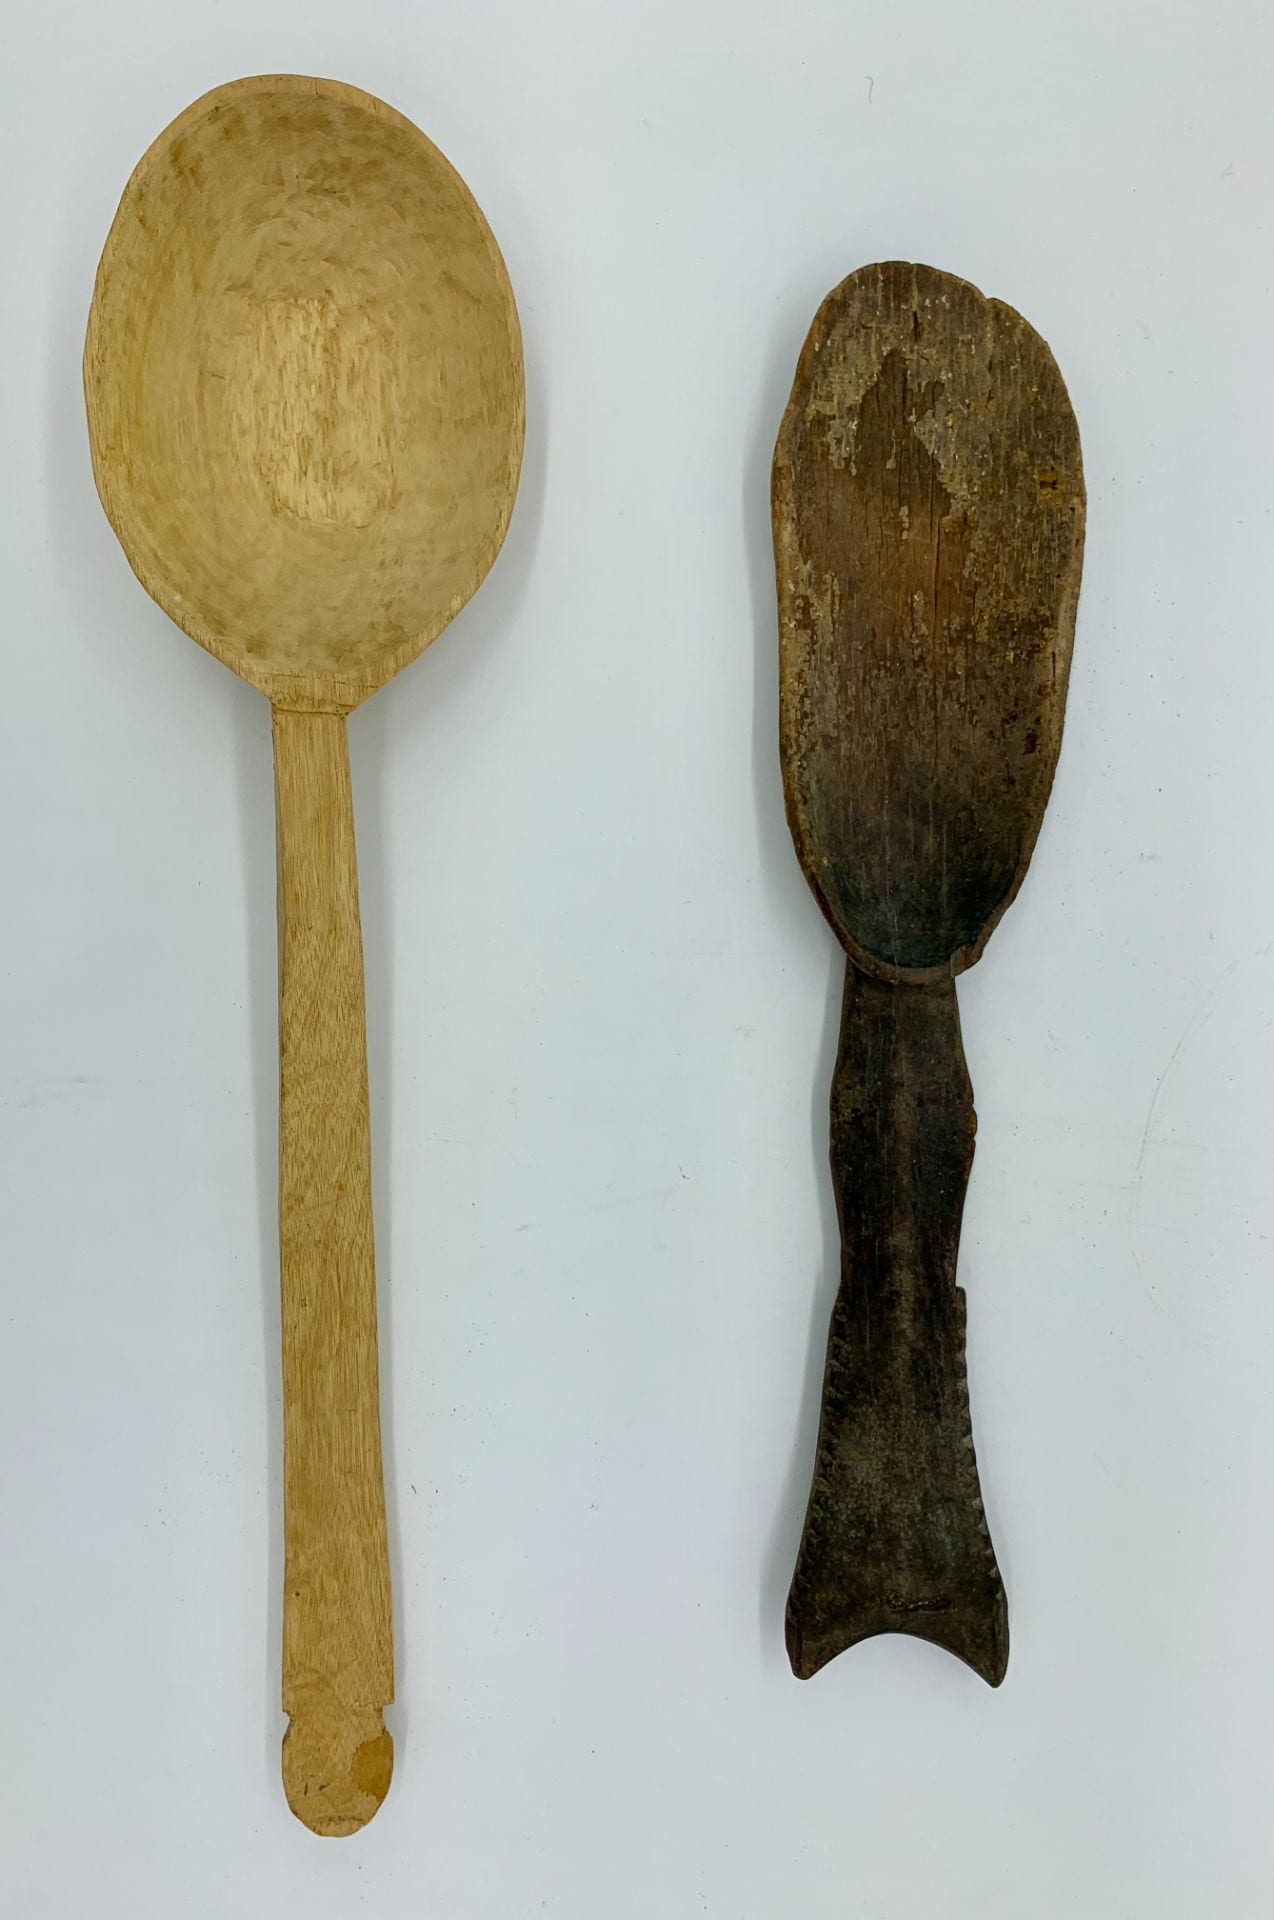 Two wooden spoons laid out on a white surface.